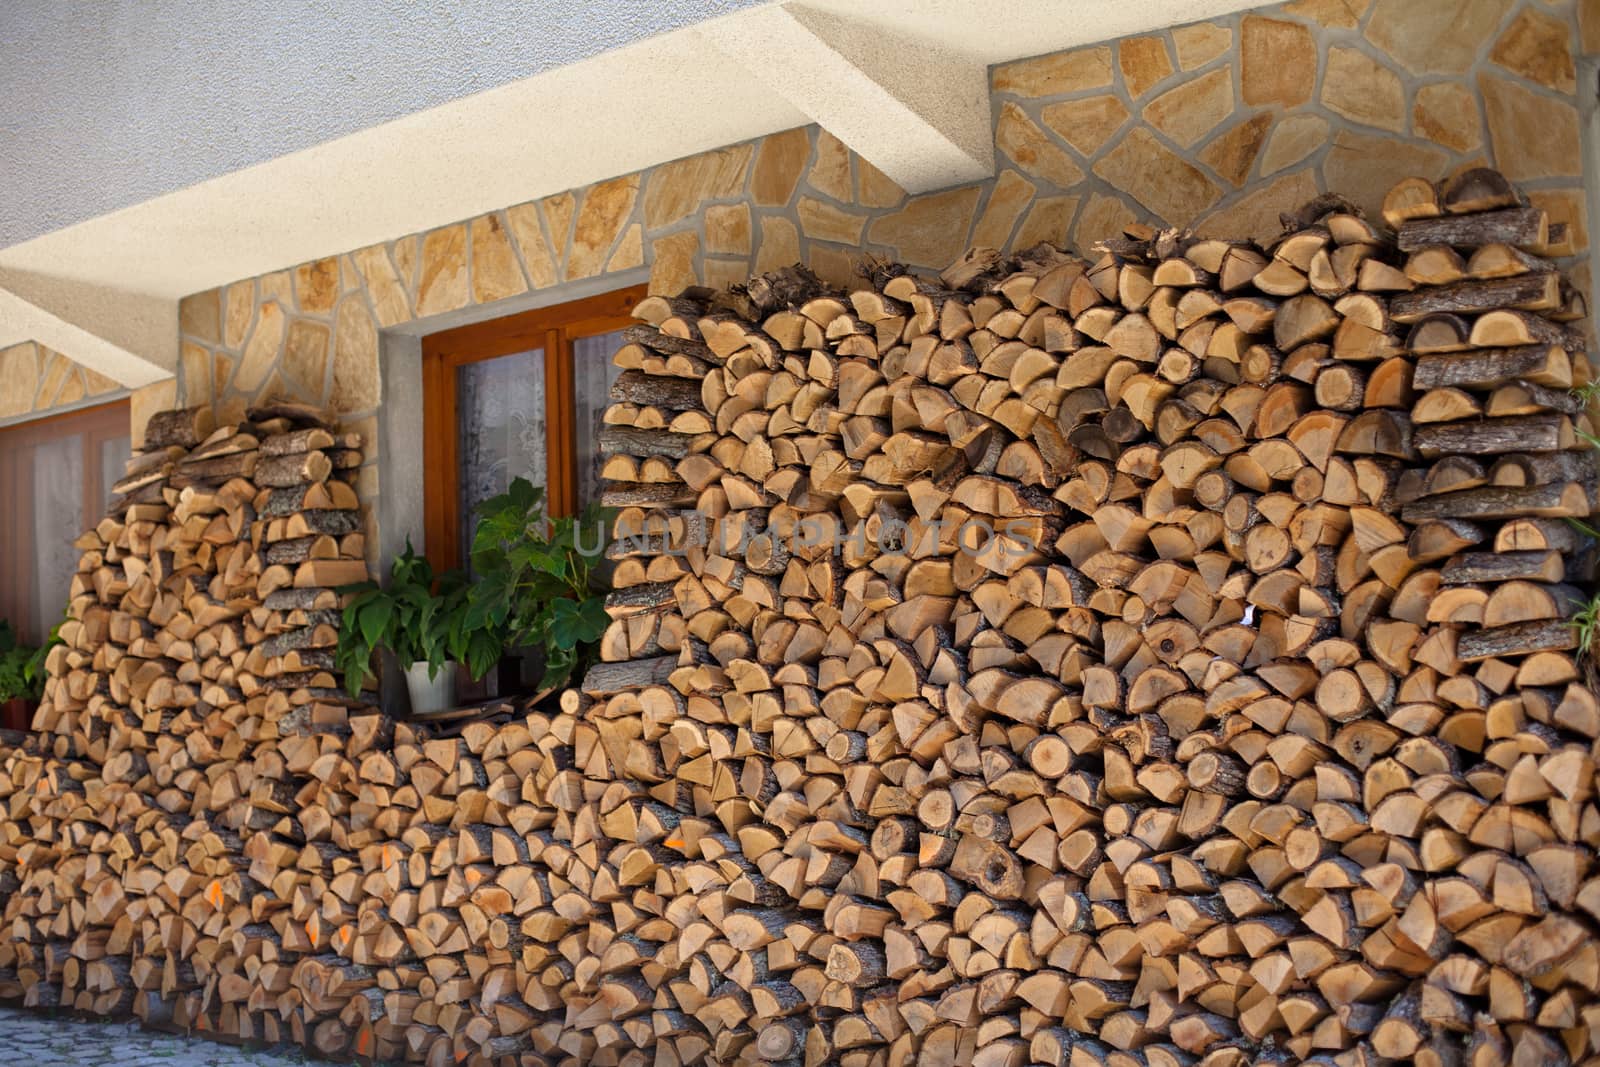 Firewood outdoor storage near a builing with window
